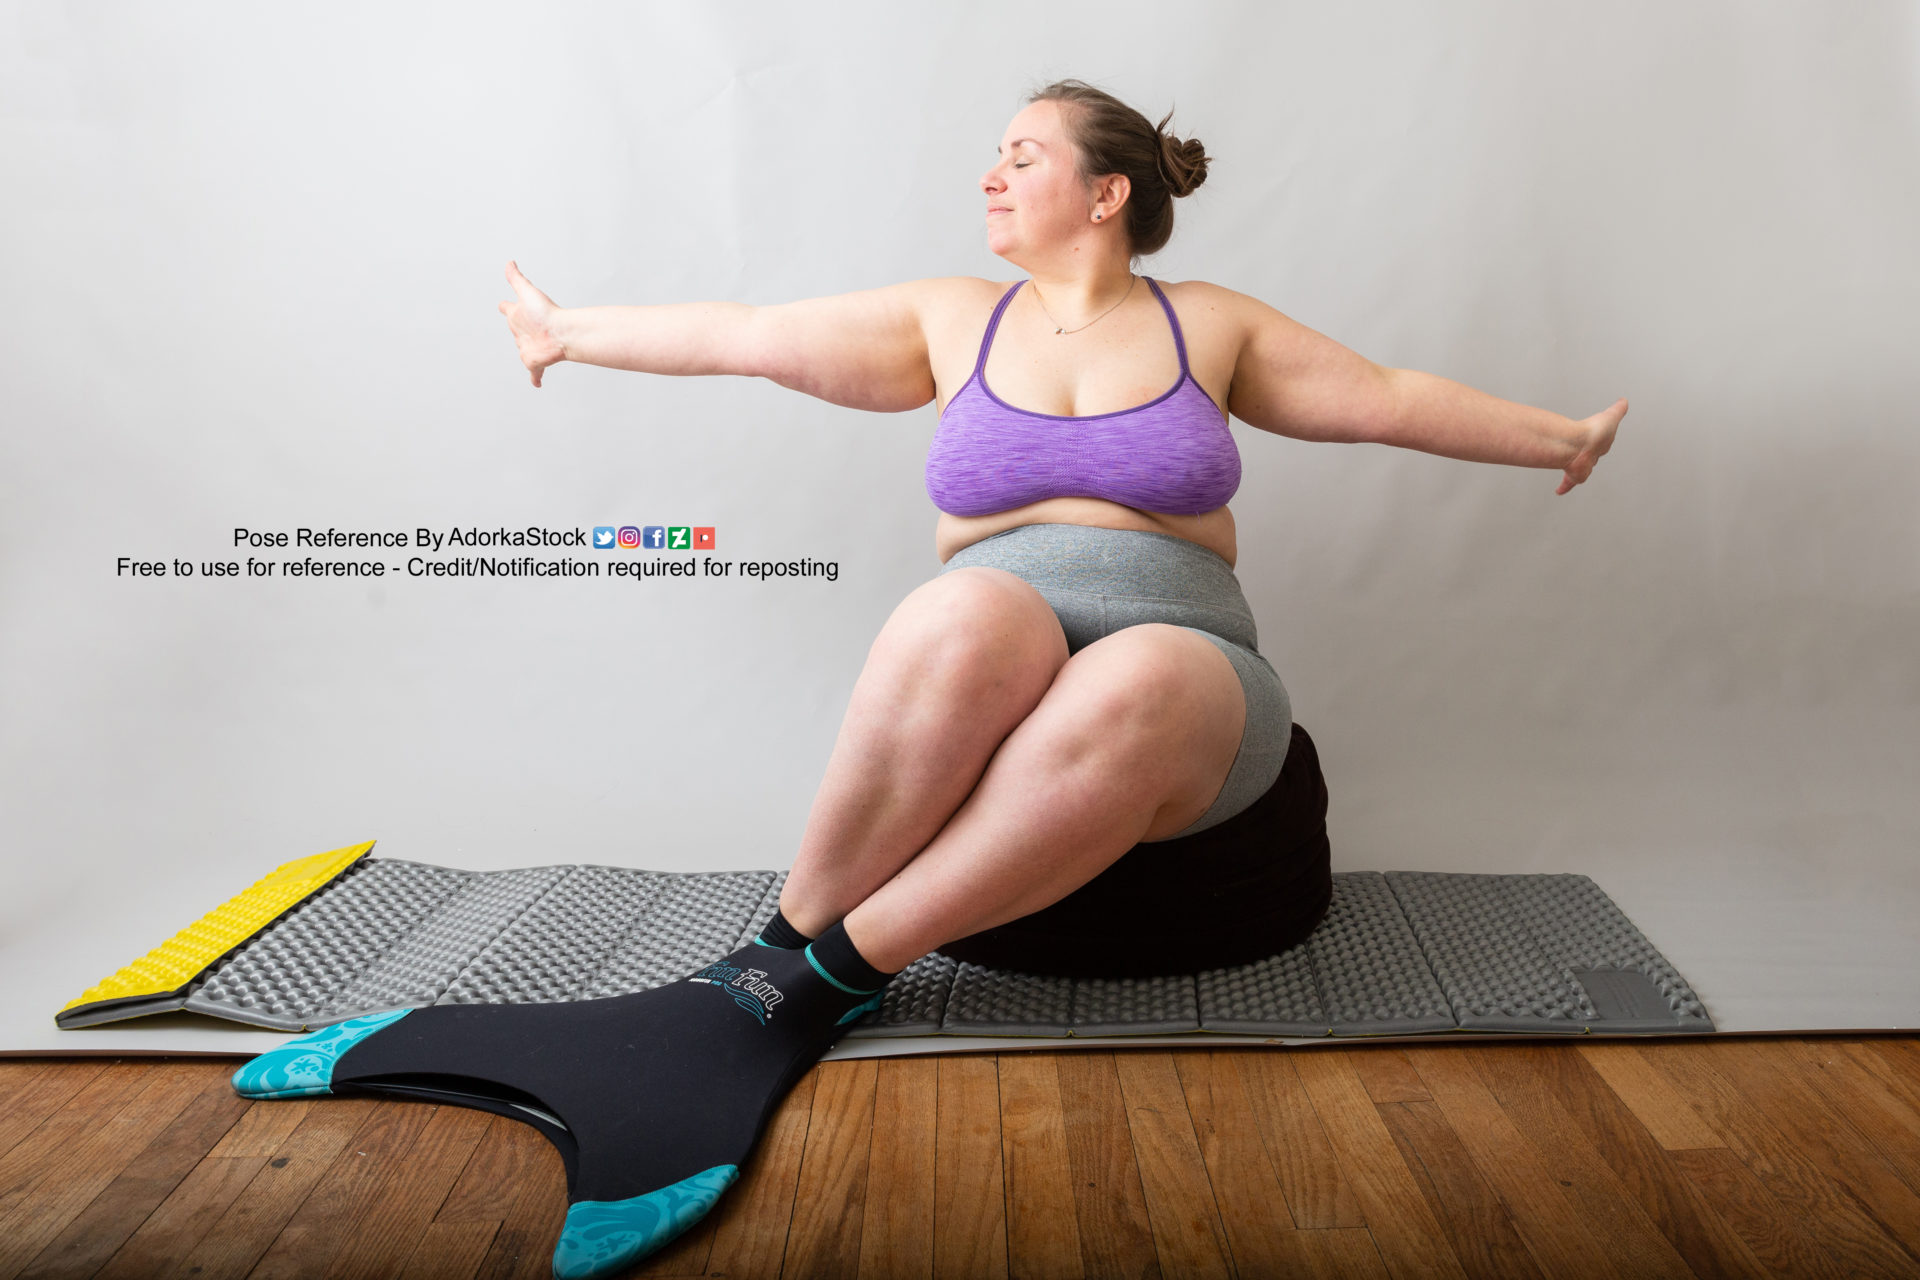 fat, white, female pose reference model wearing a mermaid tail, sitting on a cushion with arms spread out with joy